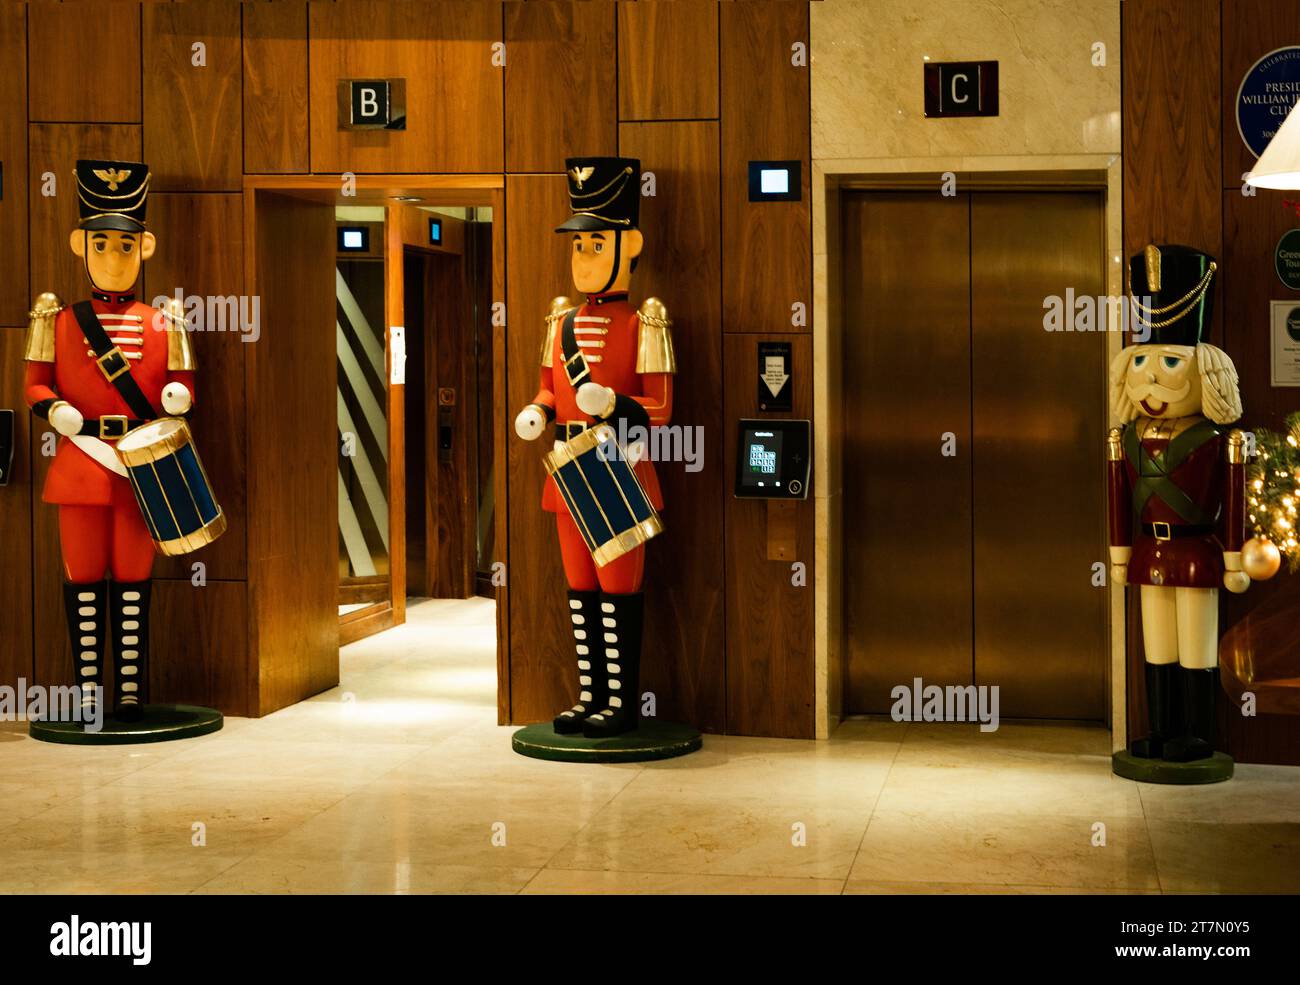 Belfast, Northern Ireland, UK - December 12, 2022: Lobby of Europa Hotel, the most bombed hotel in the world, with giant nutcrackers by elevators duri Stock Photo